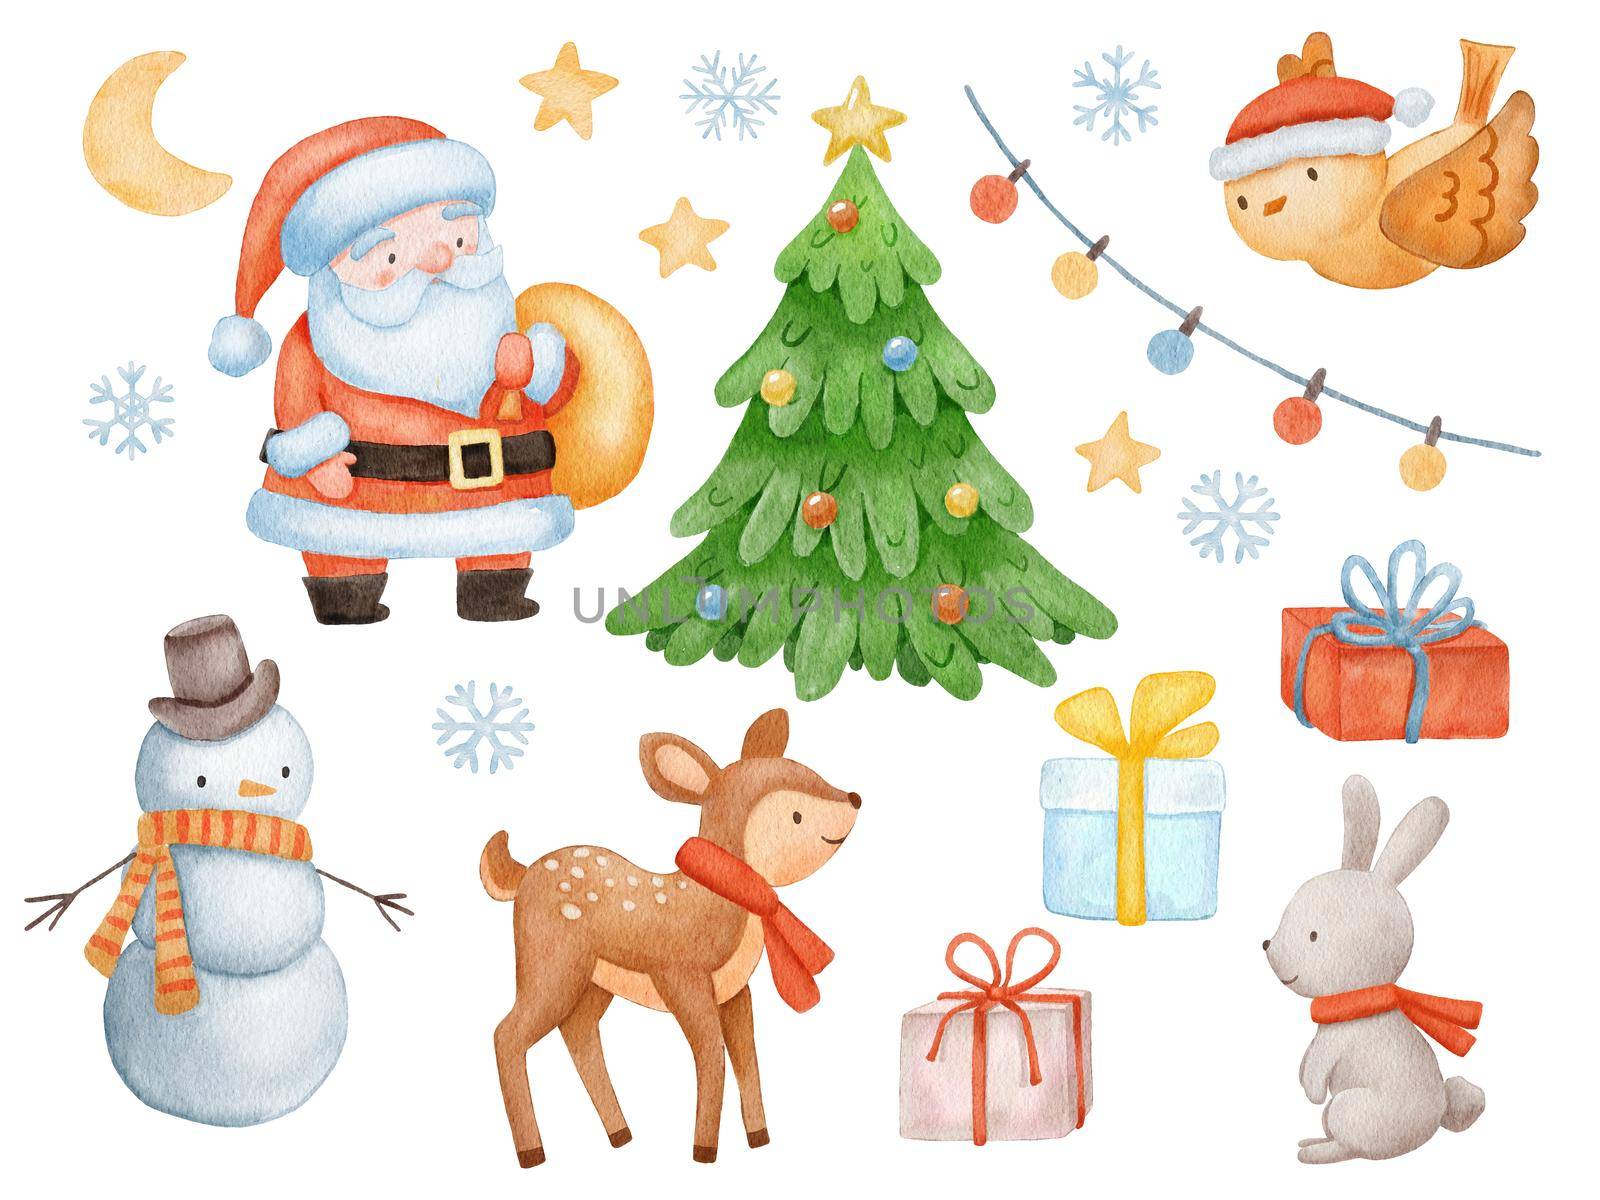 Cute Santa Claus, deer and snowman. Set of Watercolor Christmas illustrations isolated on white. by ElenaPlatova